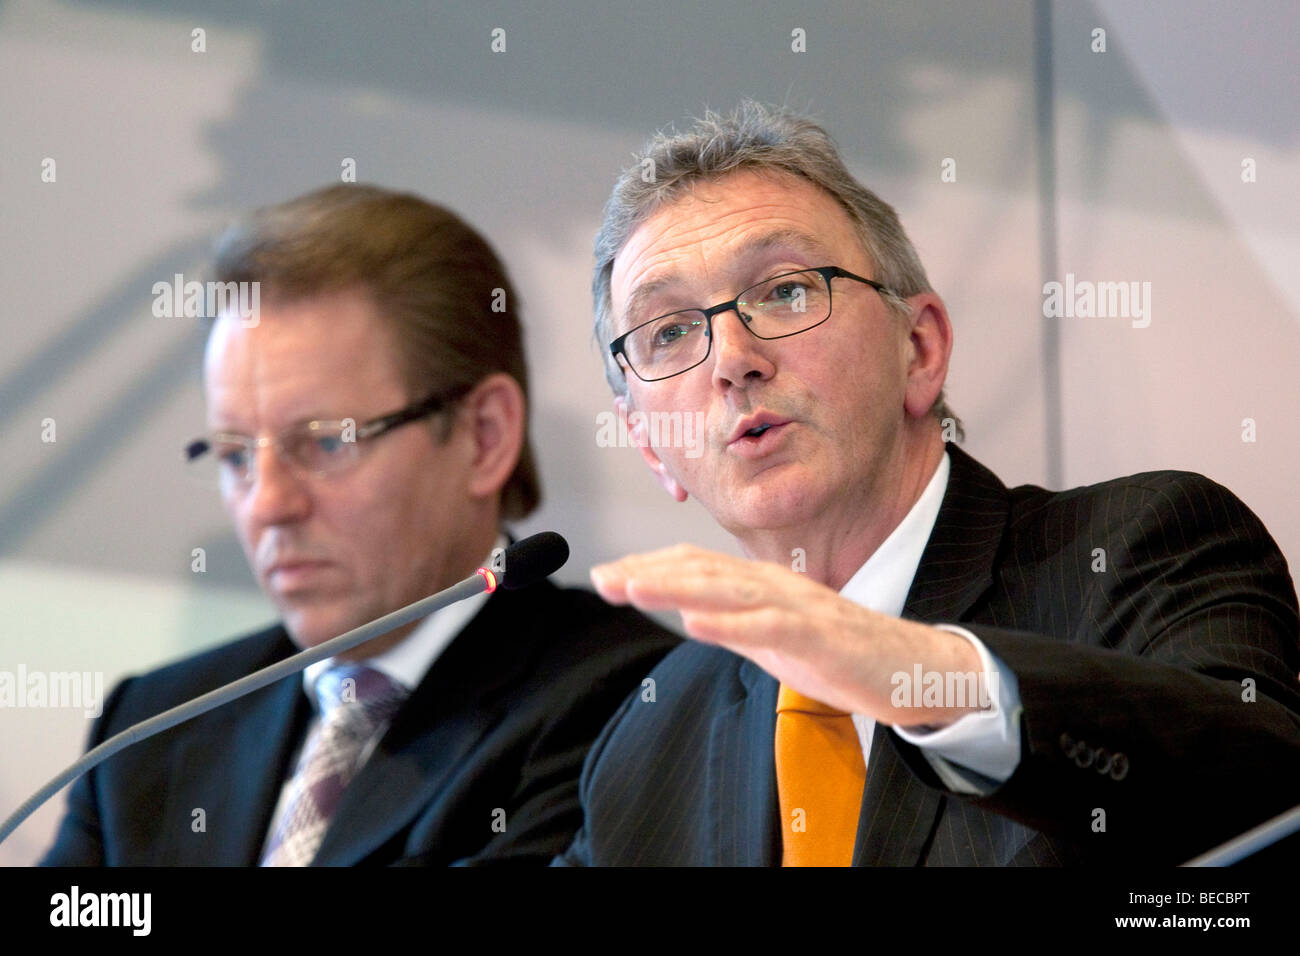 Wolfgang Mayrhuber, right, chairman and CEO of Deutsche Lufthansa AG, and Stephan Gemkow, chief financial officer of Deutsche L Stock Photo